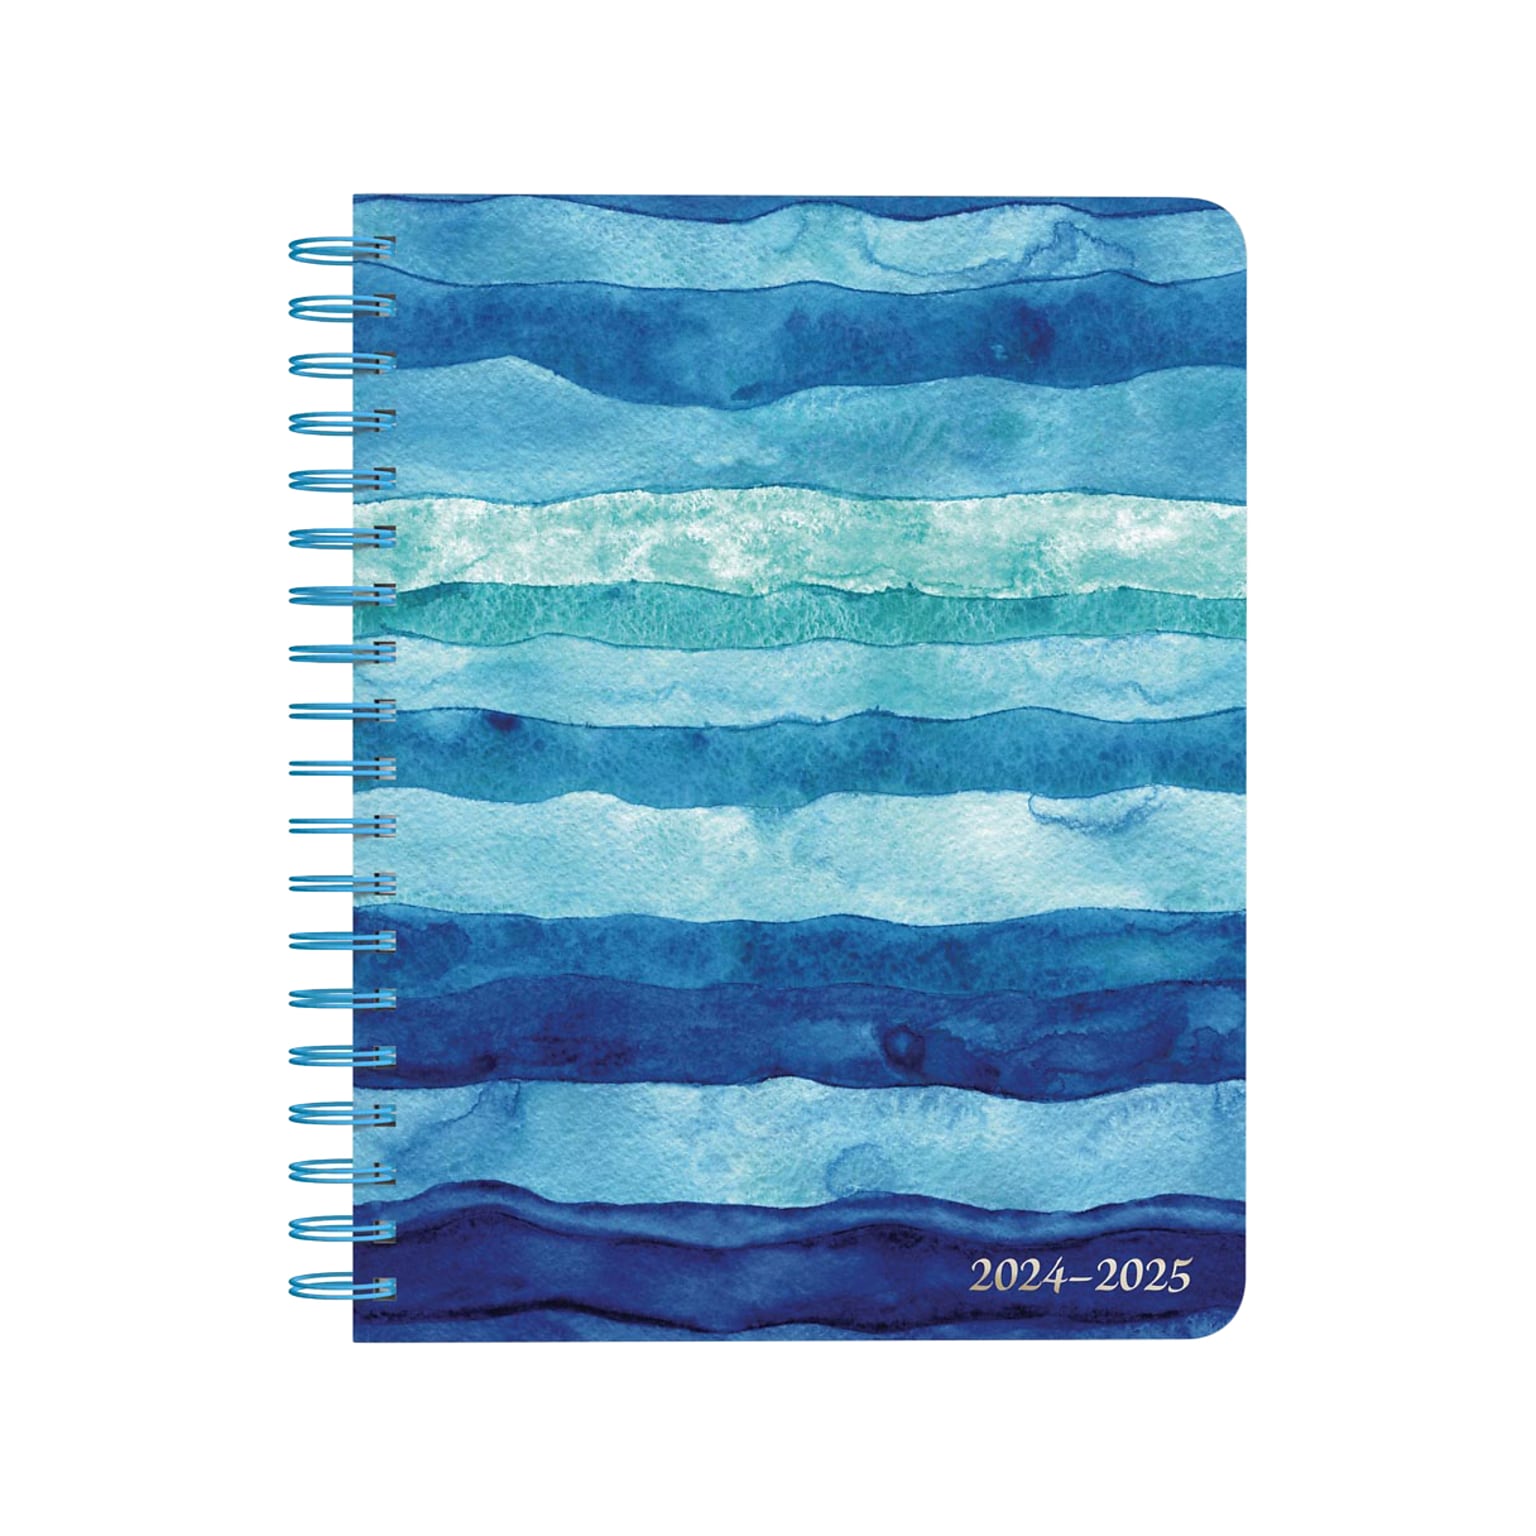 2024-2025 Plato Seaside Currents 6 x 7.75 Academic & Calendar Weekly Planner, Paperboard Cover, Multicolor (9781975480424)